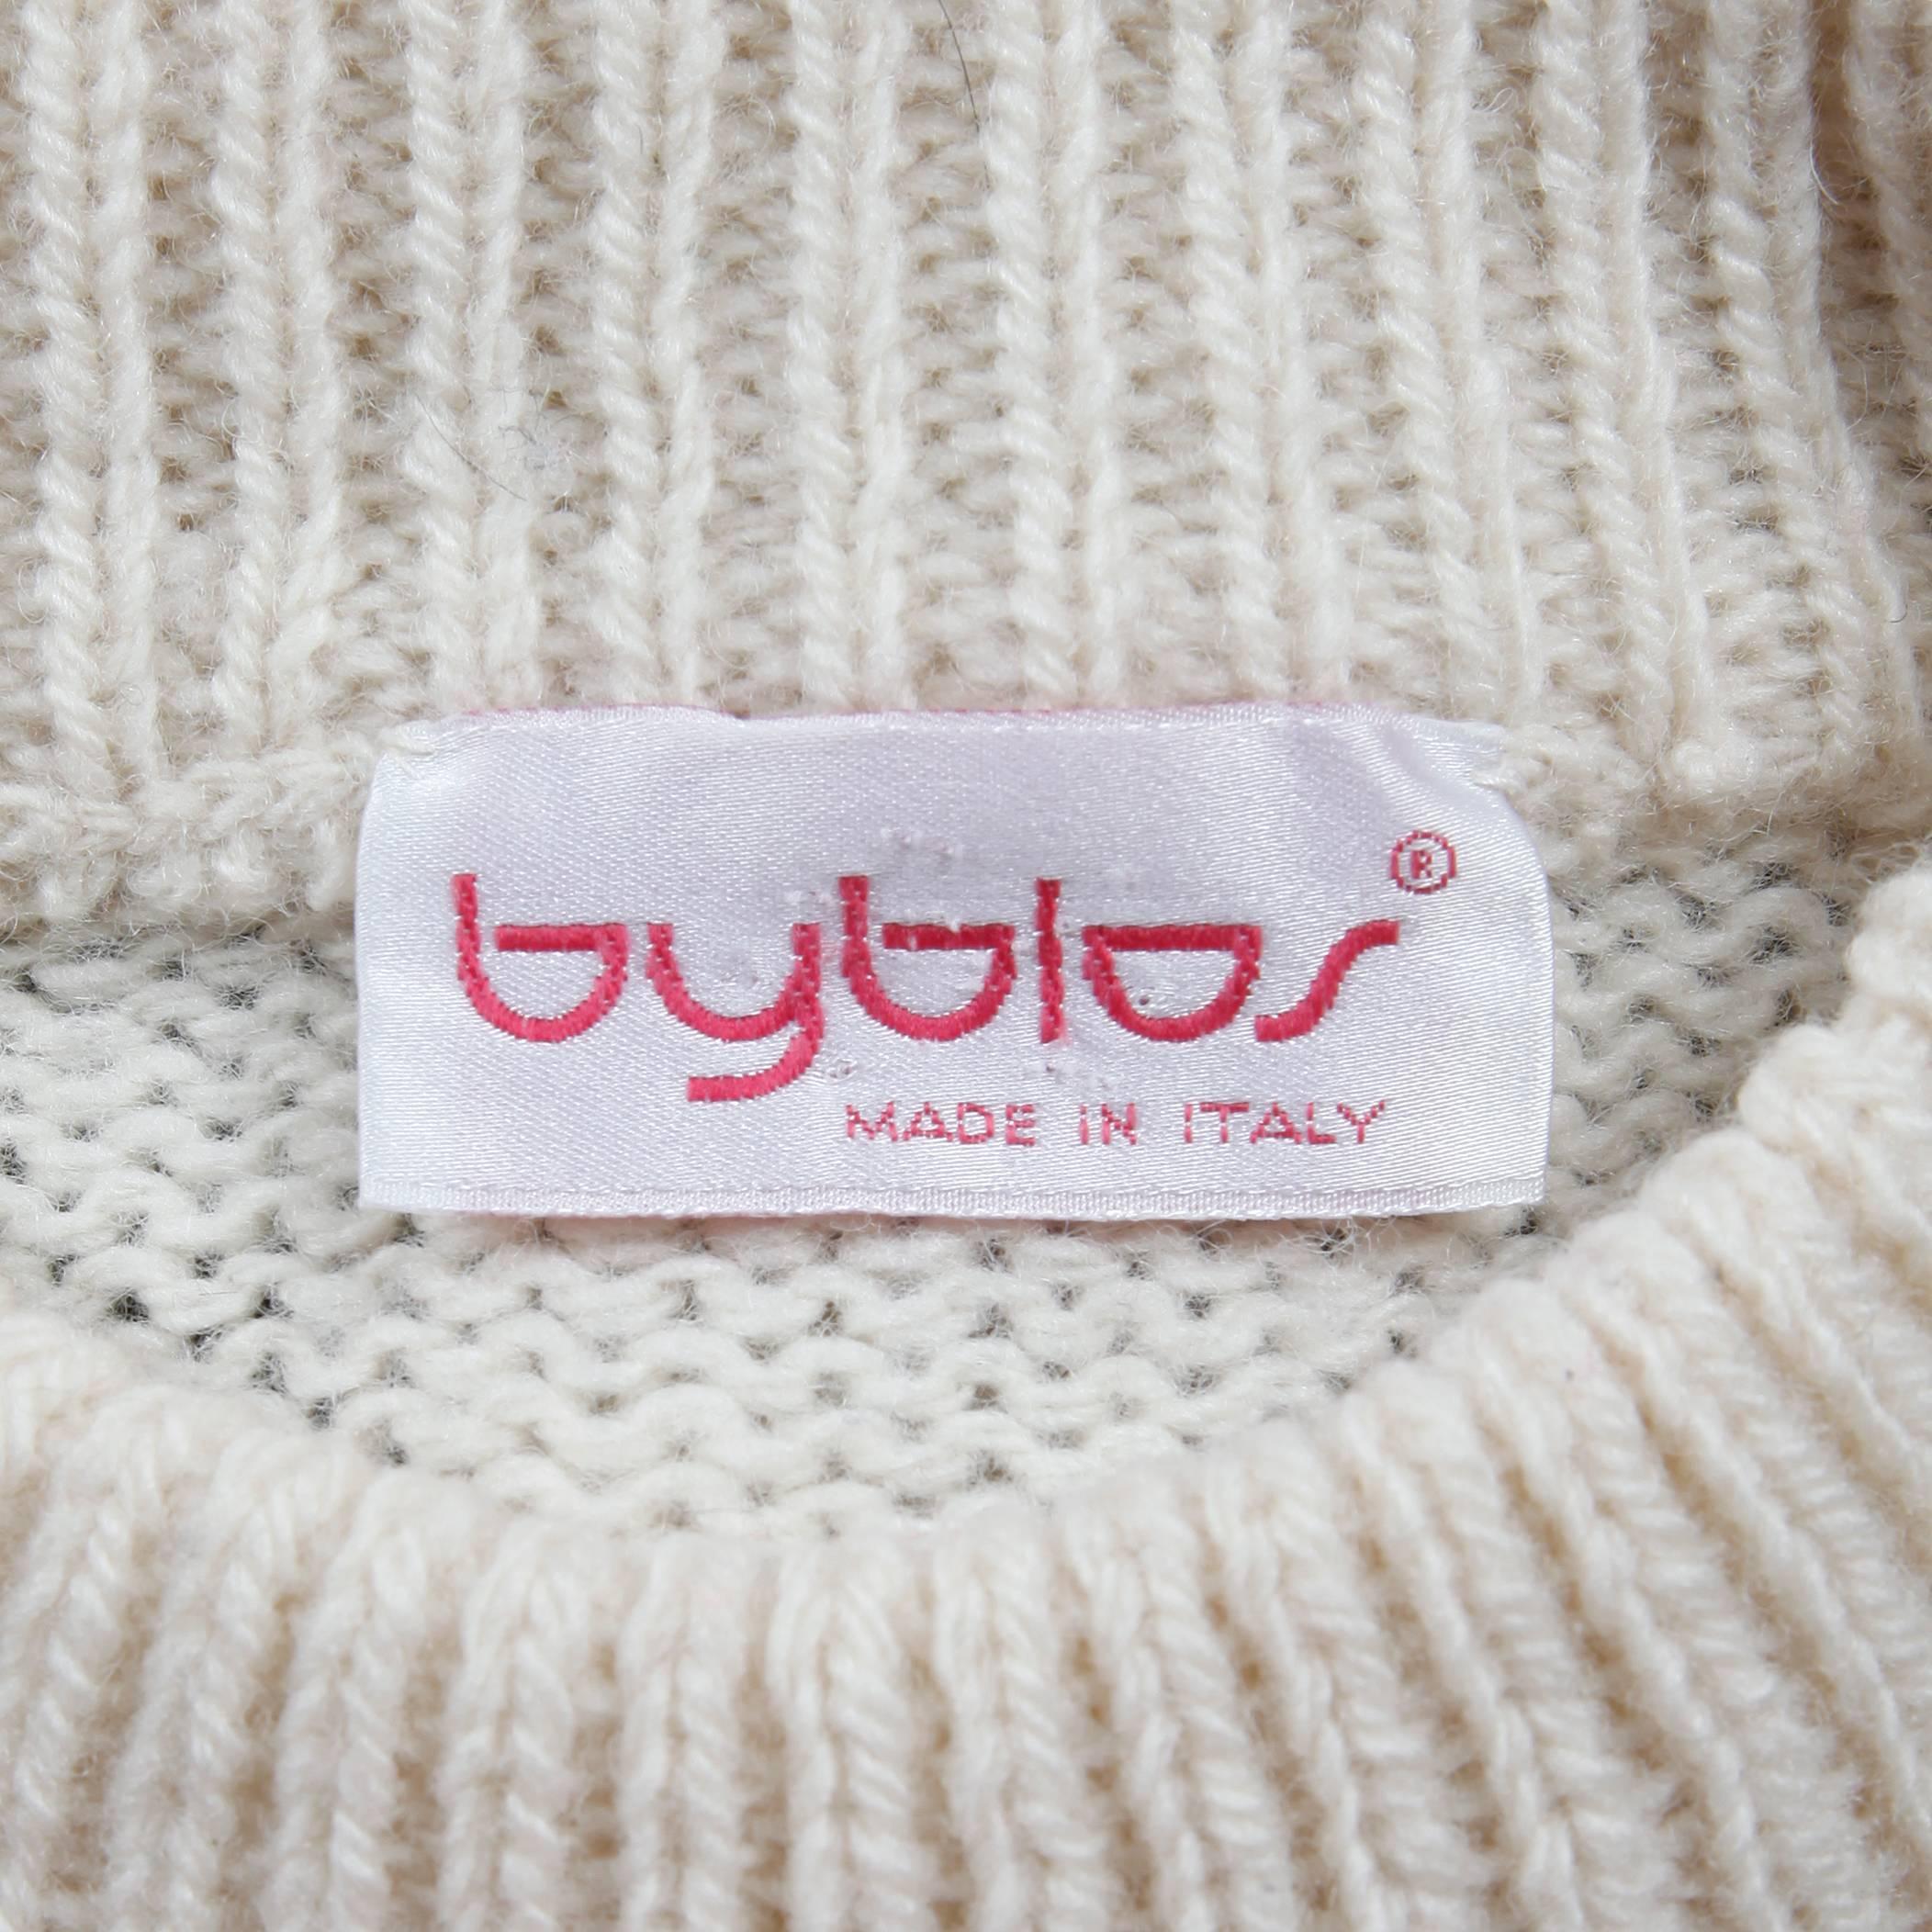 1990s Byblos Vintage 100% Wool Chunky Knit Sweater Top with Flower Design In Excellent Condition For Sale In Sparks, NV